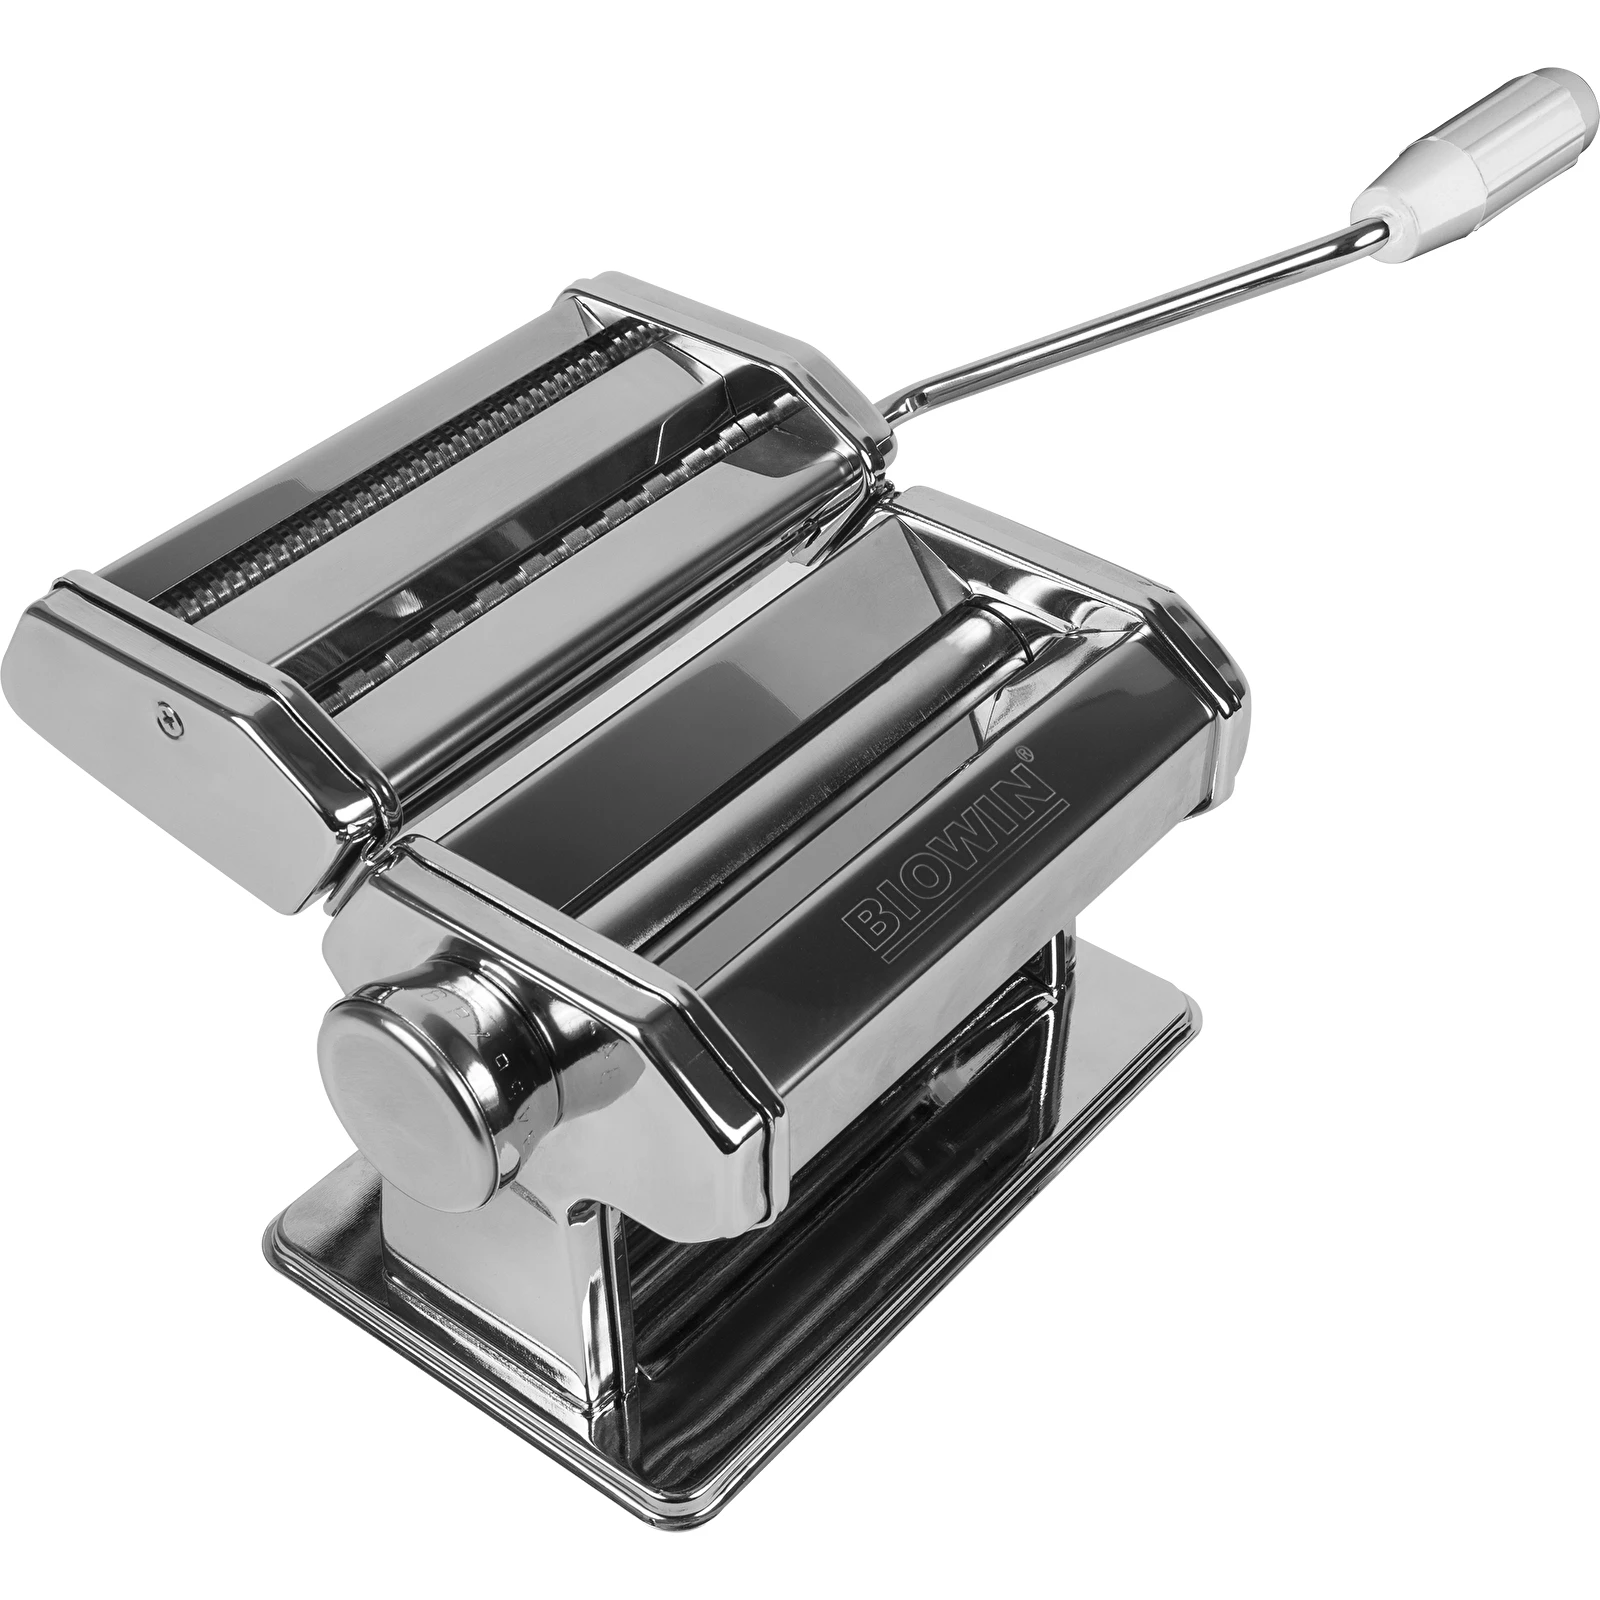 Stainless Steel Manual Pasta Maker Machine - My Charity Boxes